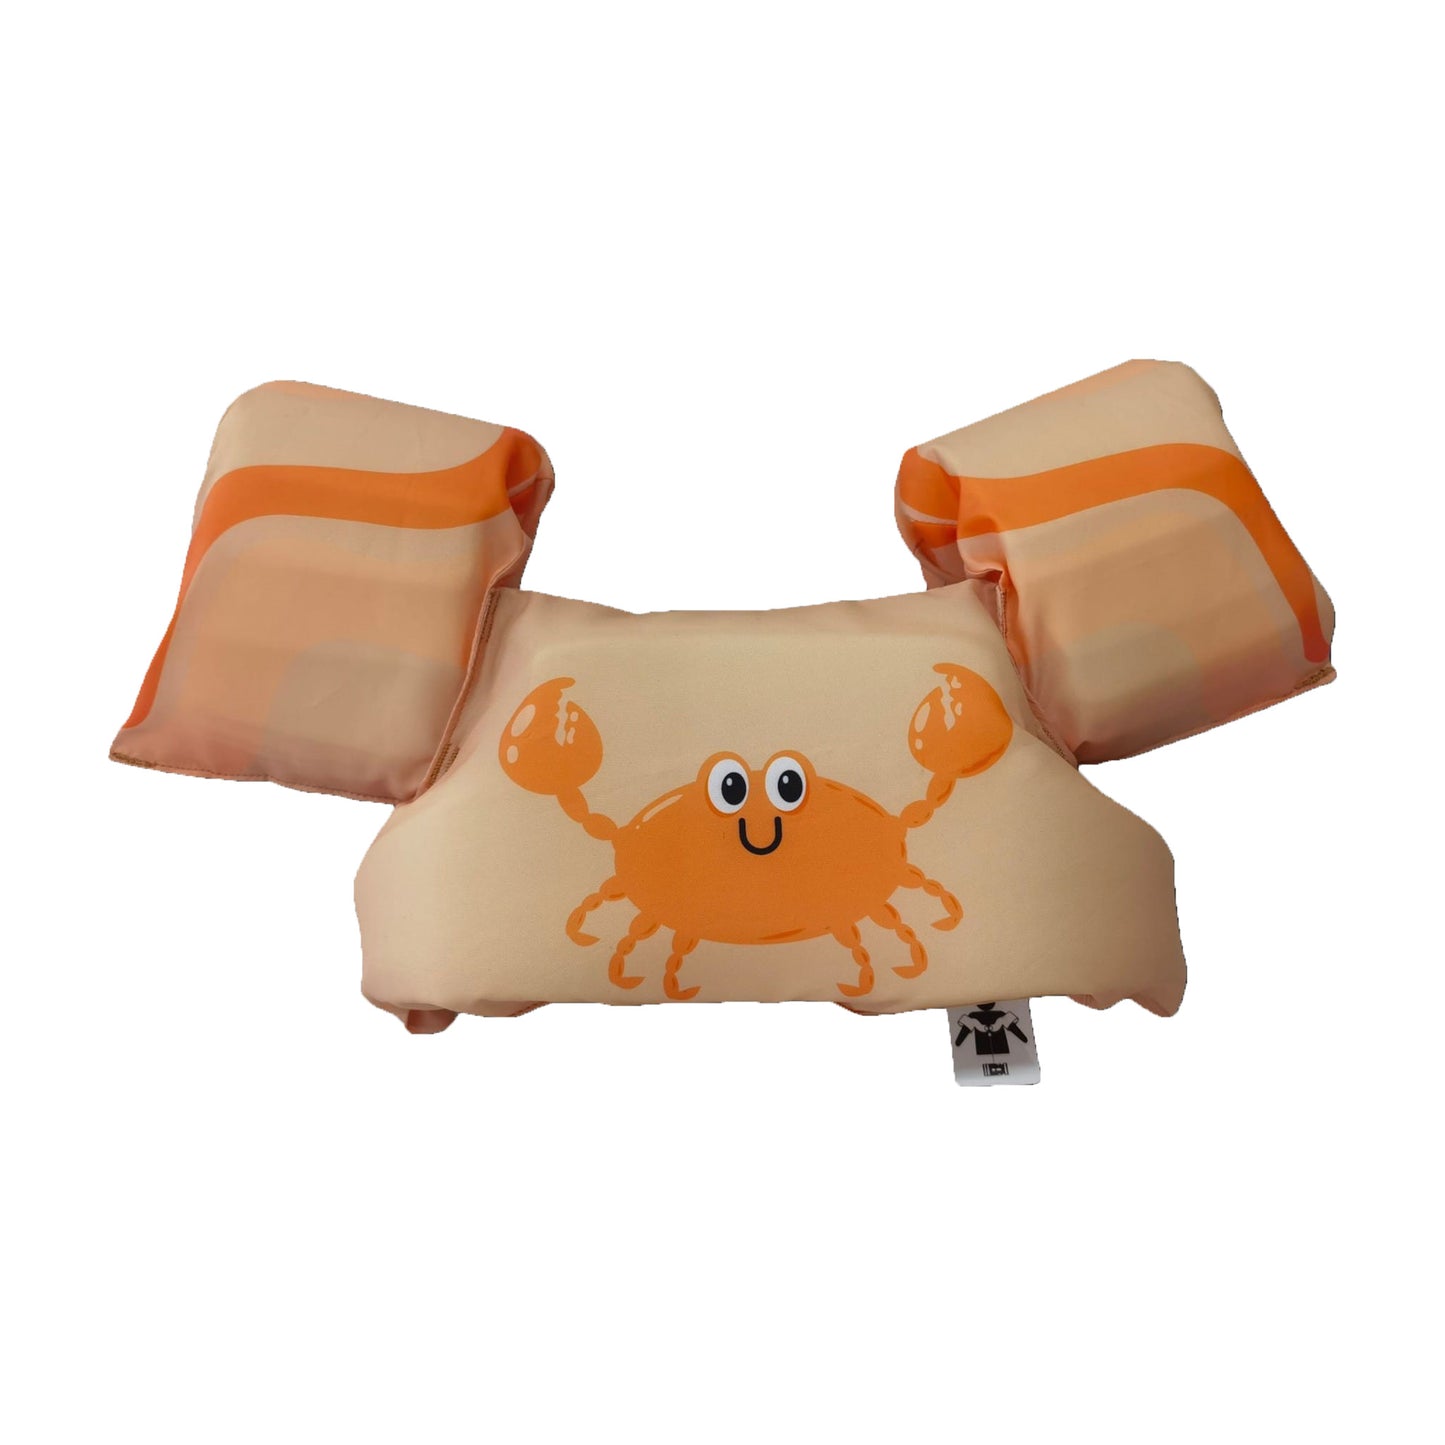 SE Puddle Jumper Crabs 2-6 years old